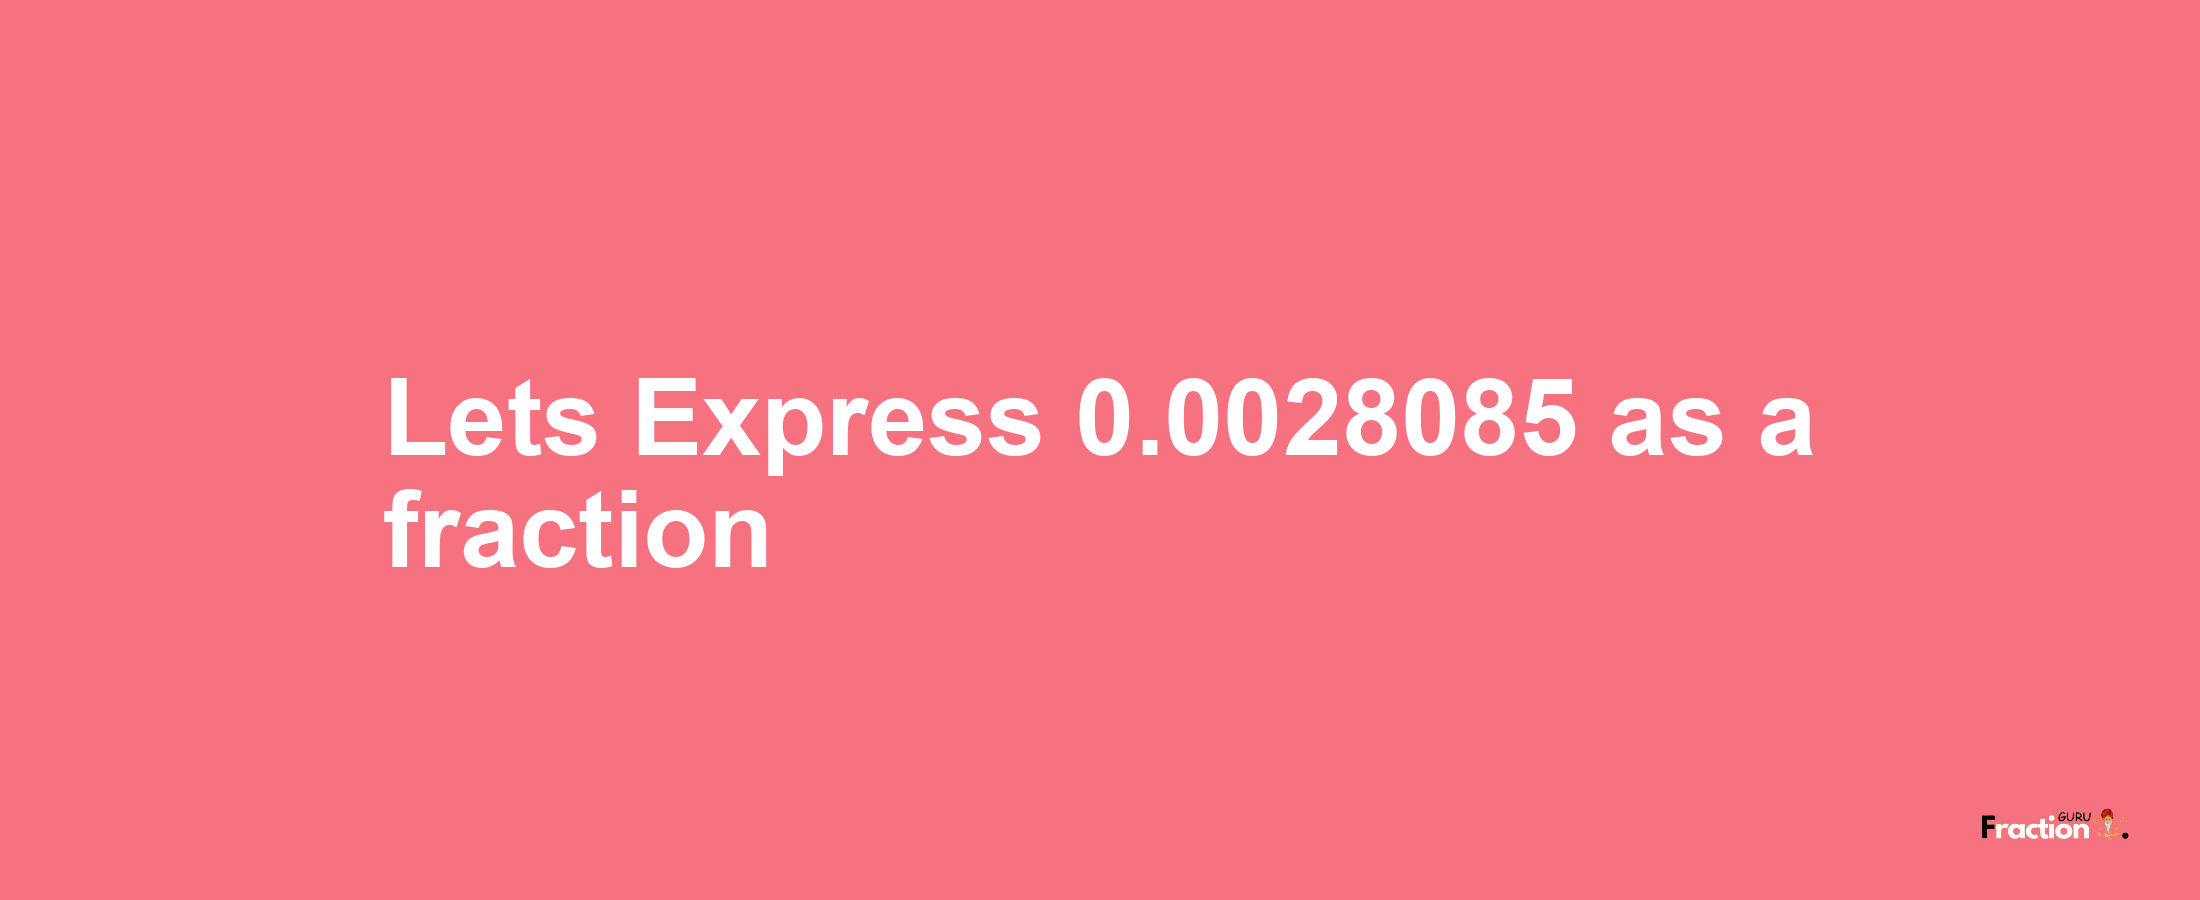 Lets Express 0.0028085 as afraction